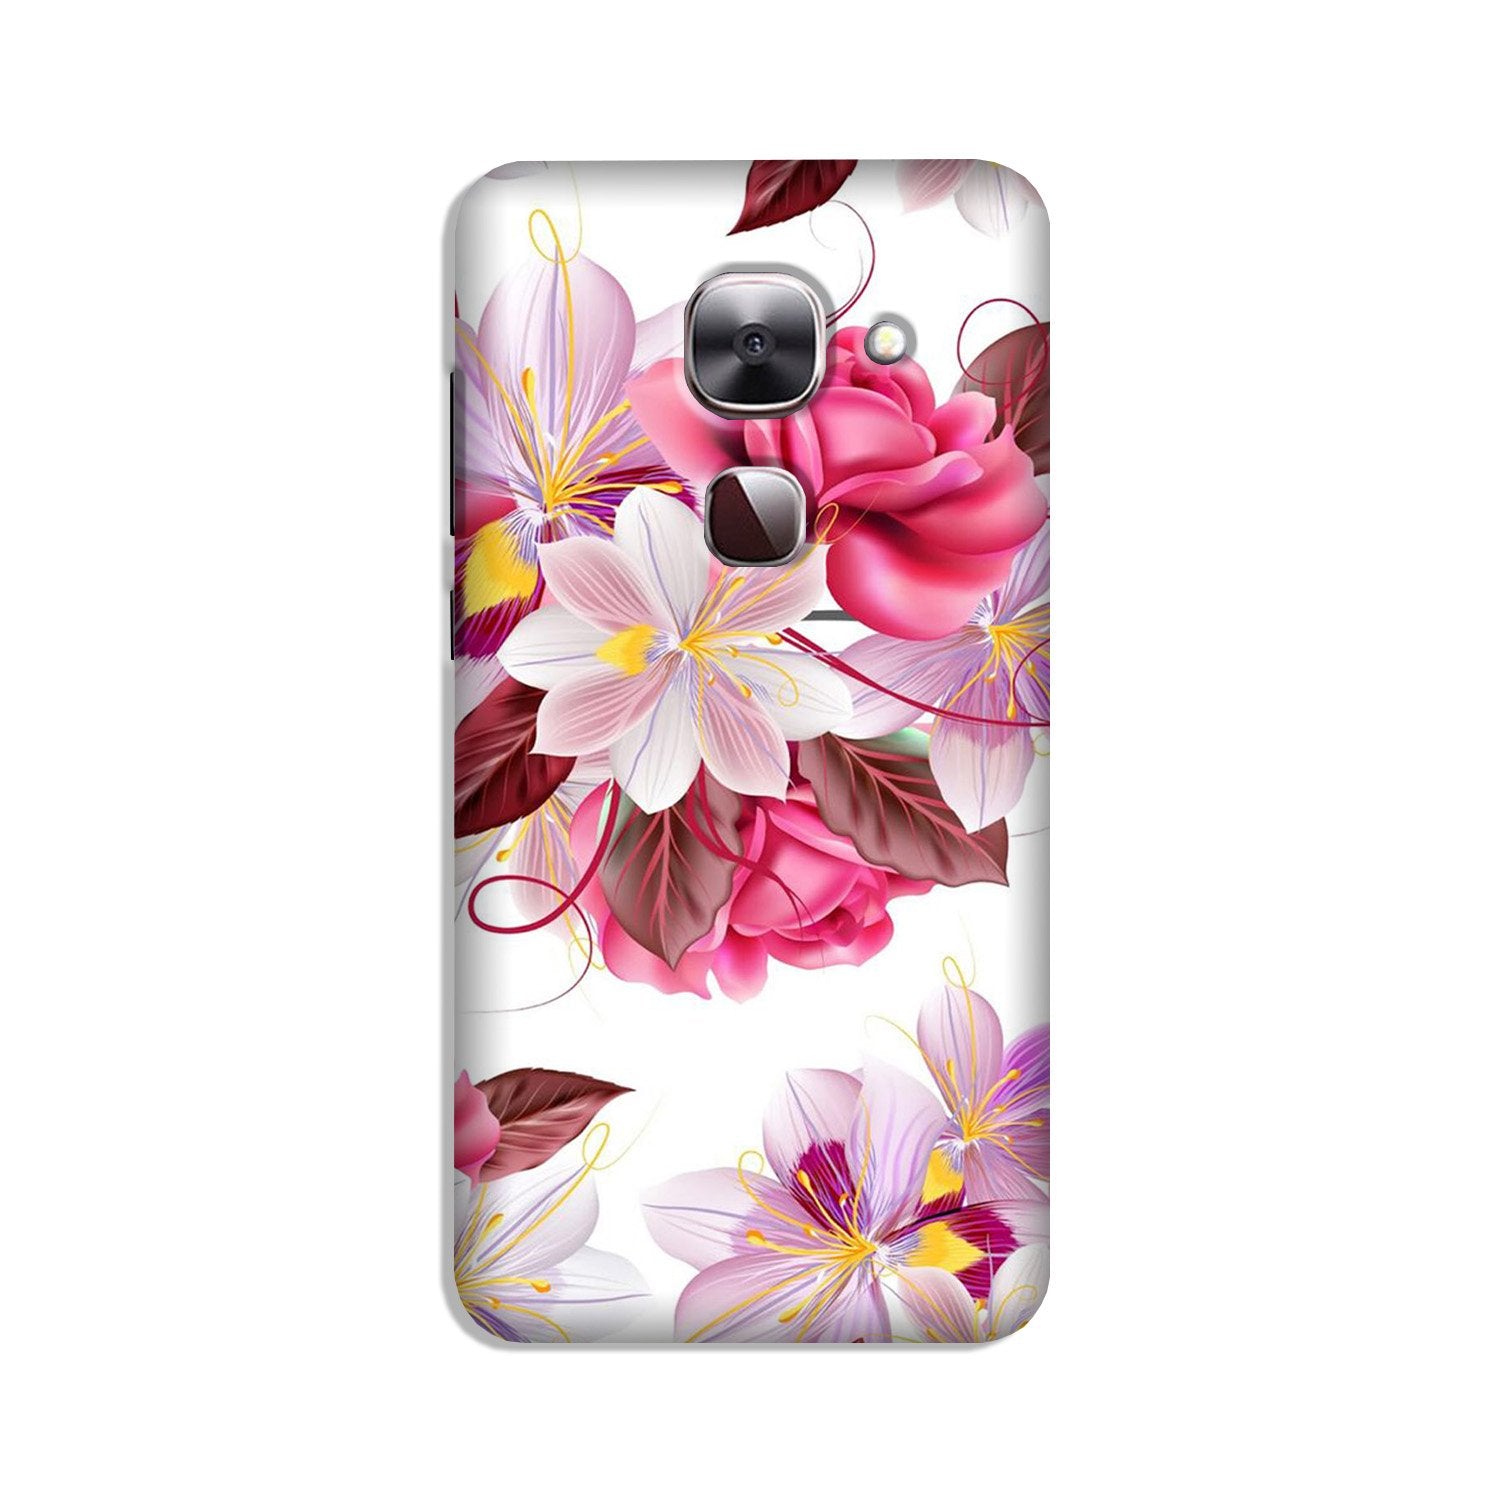 Beautiful flowers Case for LeEco le 2s